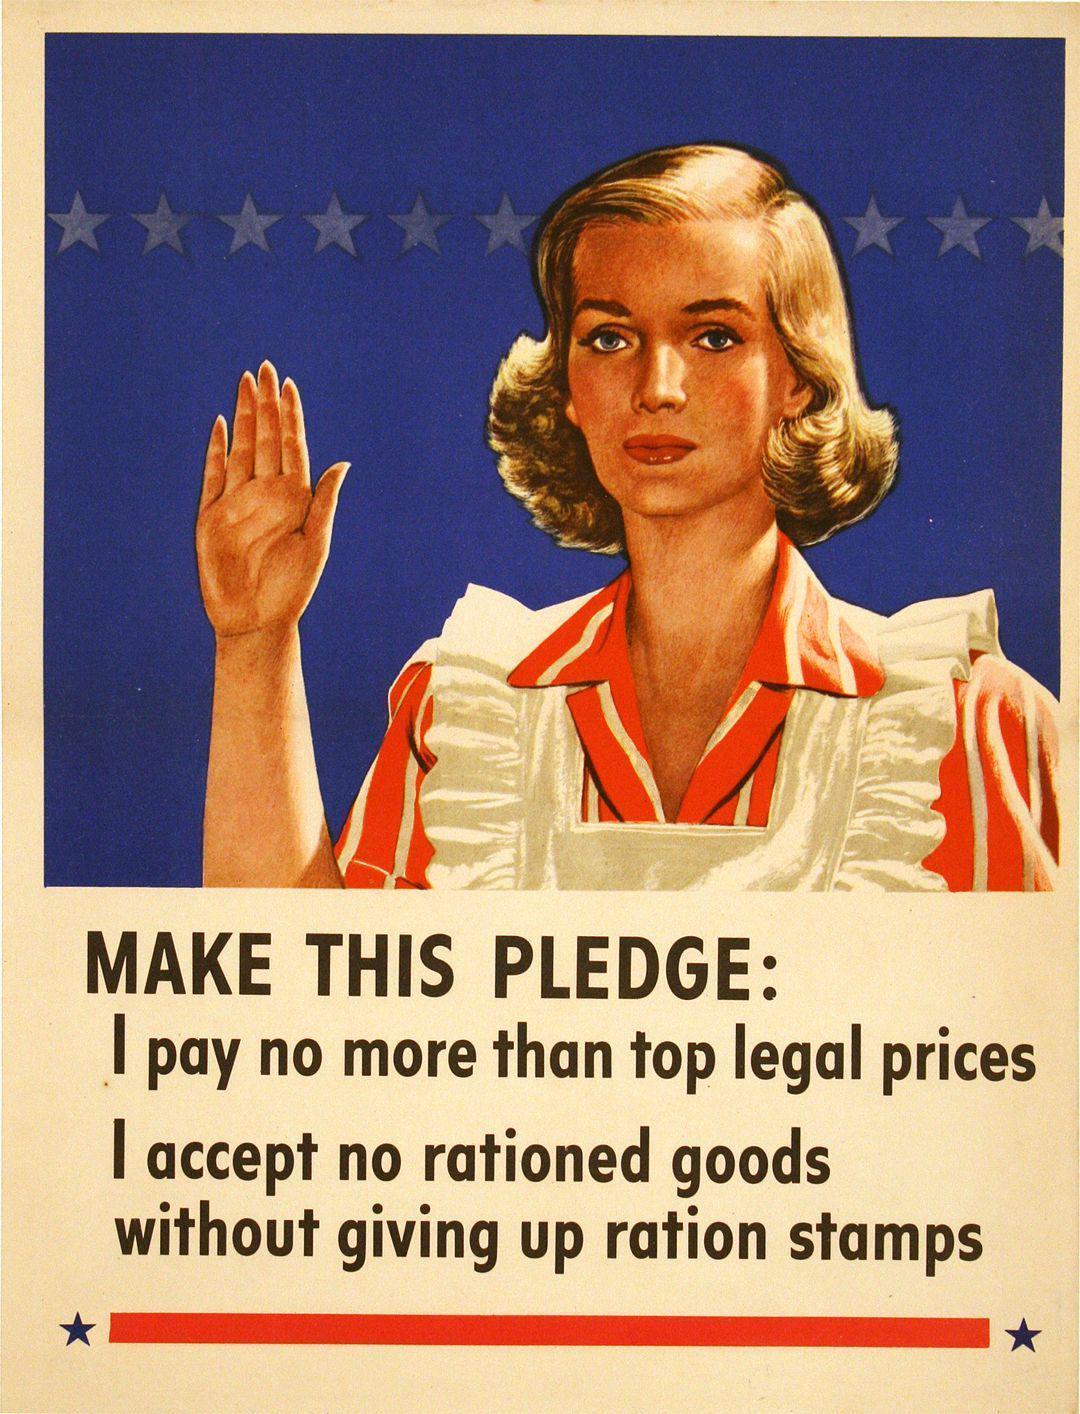 Authentic World War II American Poster - I Make This Pledge by Frederick Cooper